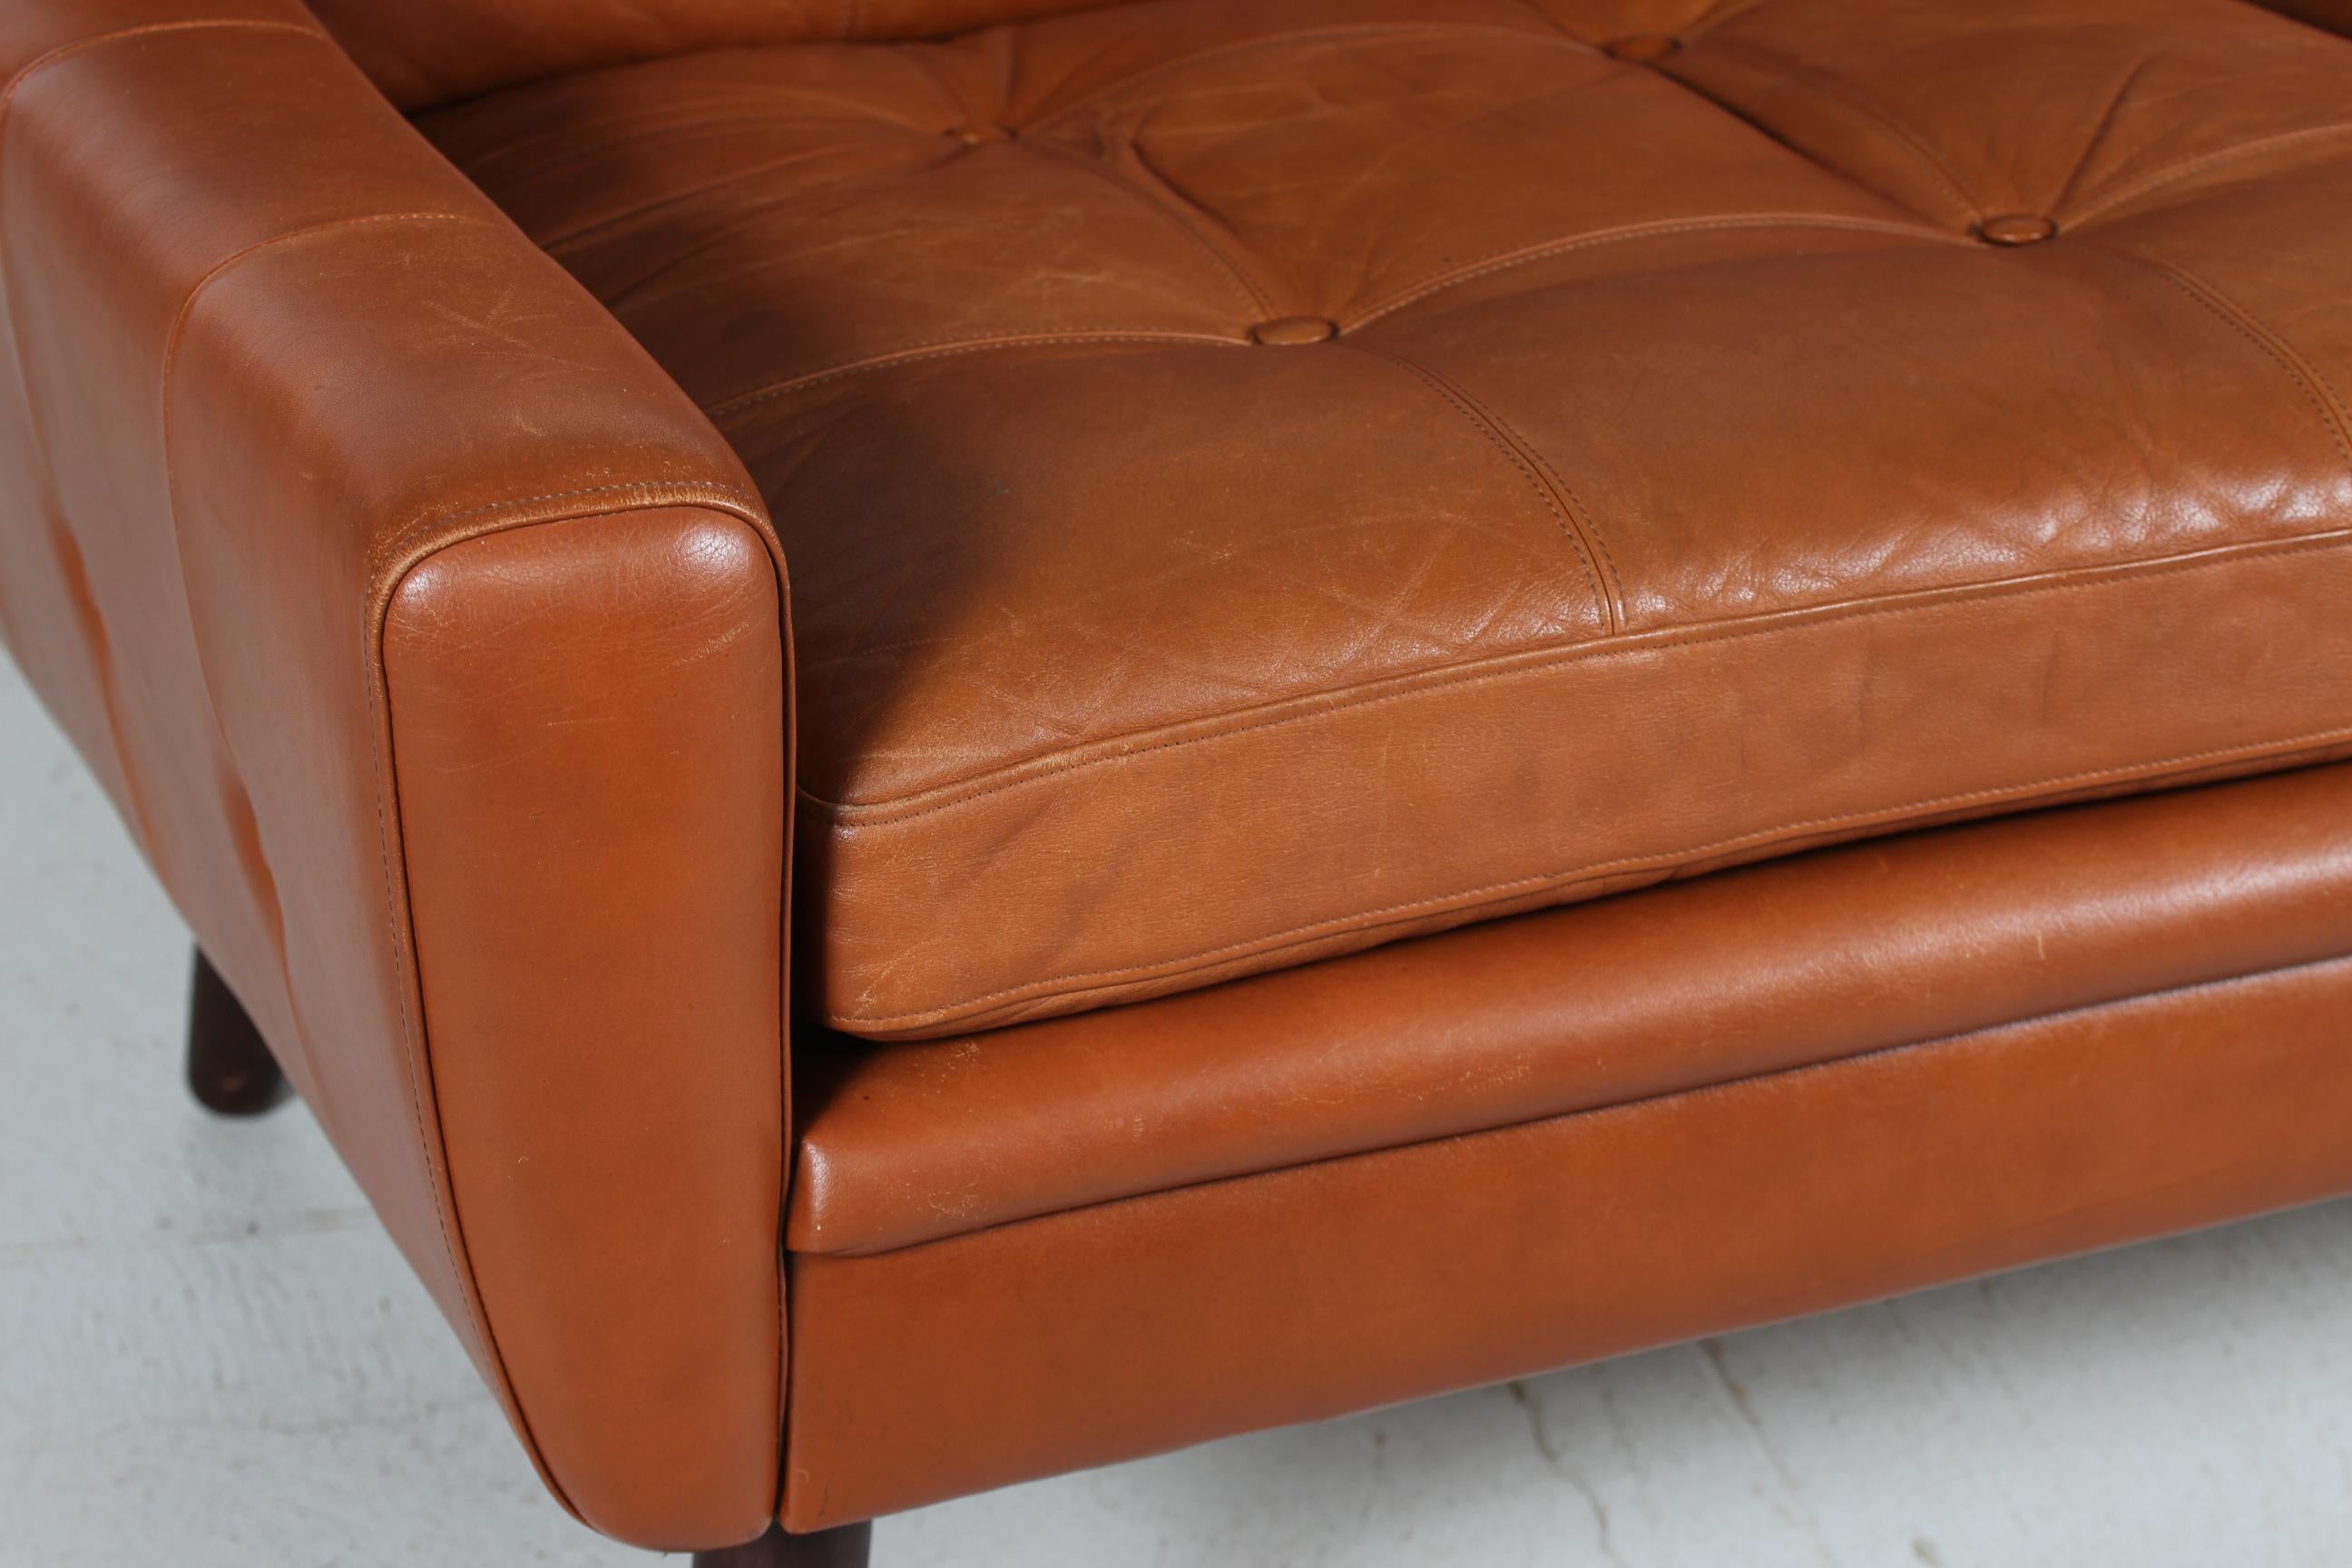 Danish Modern Two-Seat Sofa with Cognac-Colored Leather Made in Denmark 1960s For Sale 2